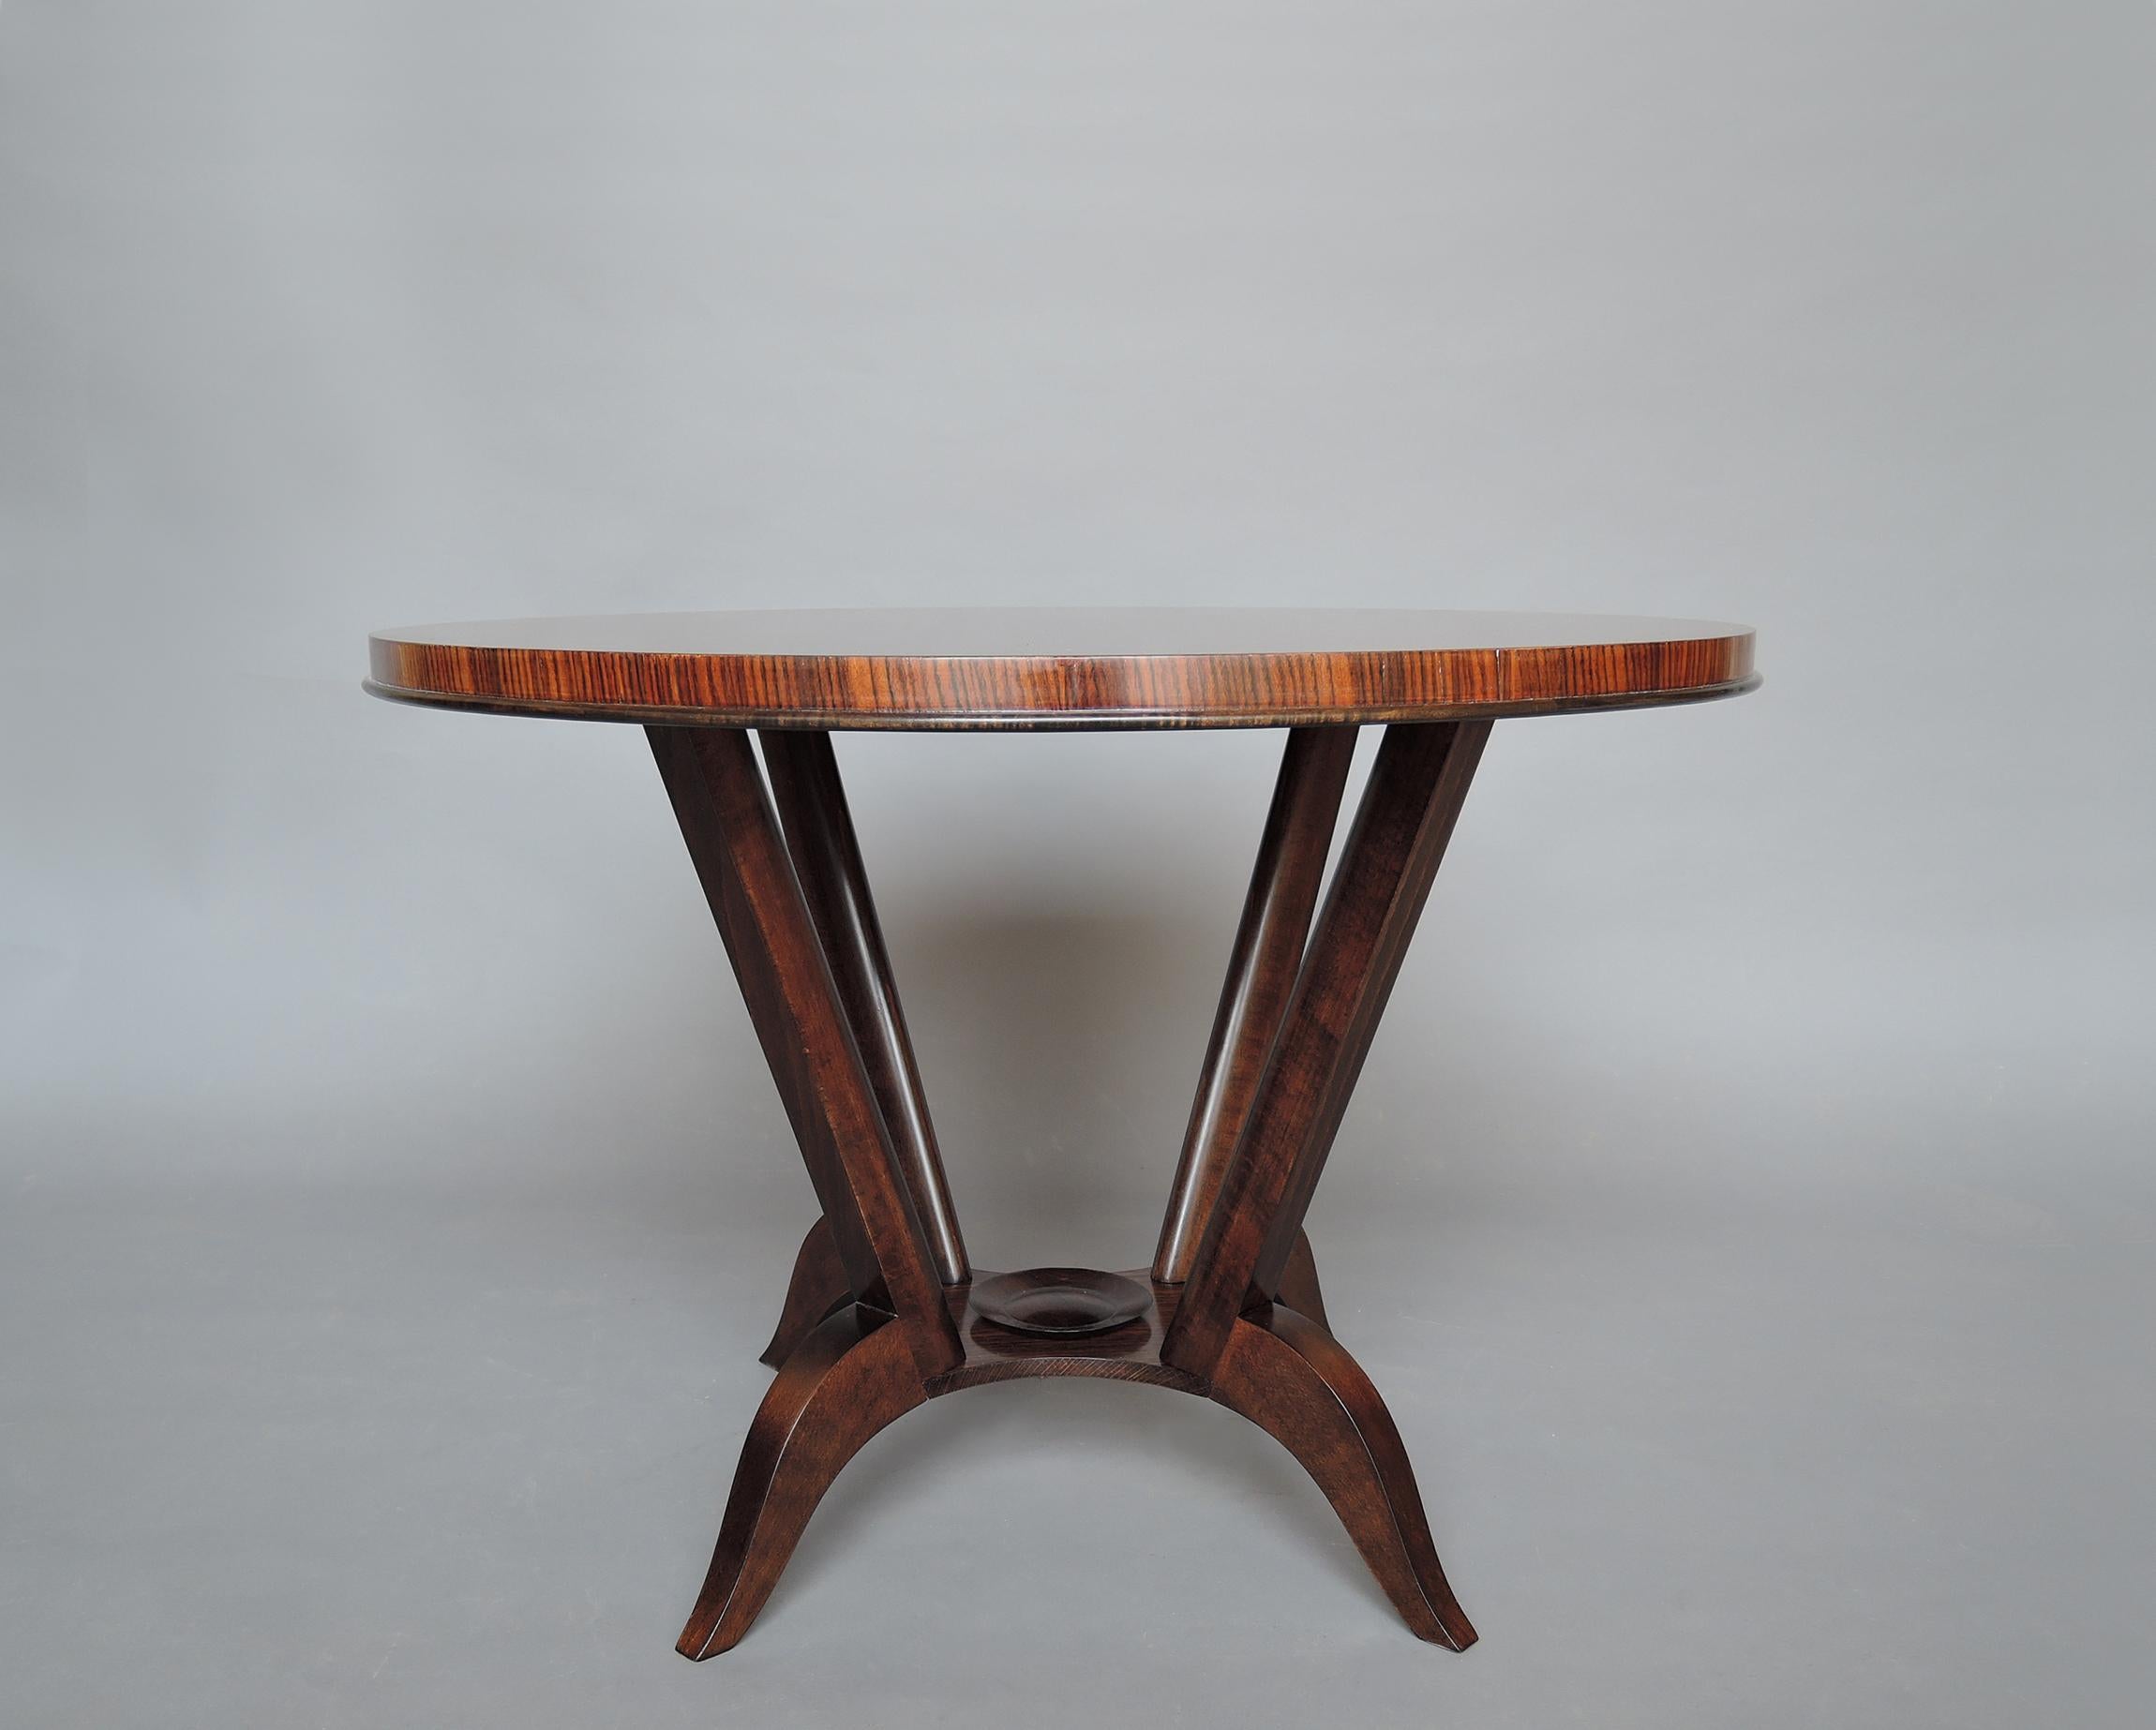 A fine French Art Deco gueridon / side table with a rosewood top and a four curved-leg ebonized pedestal.